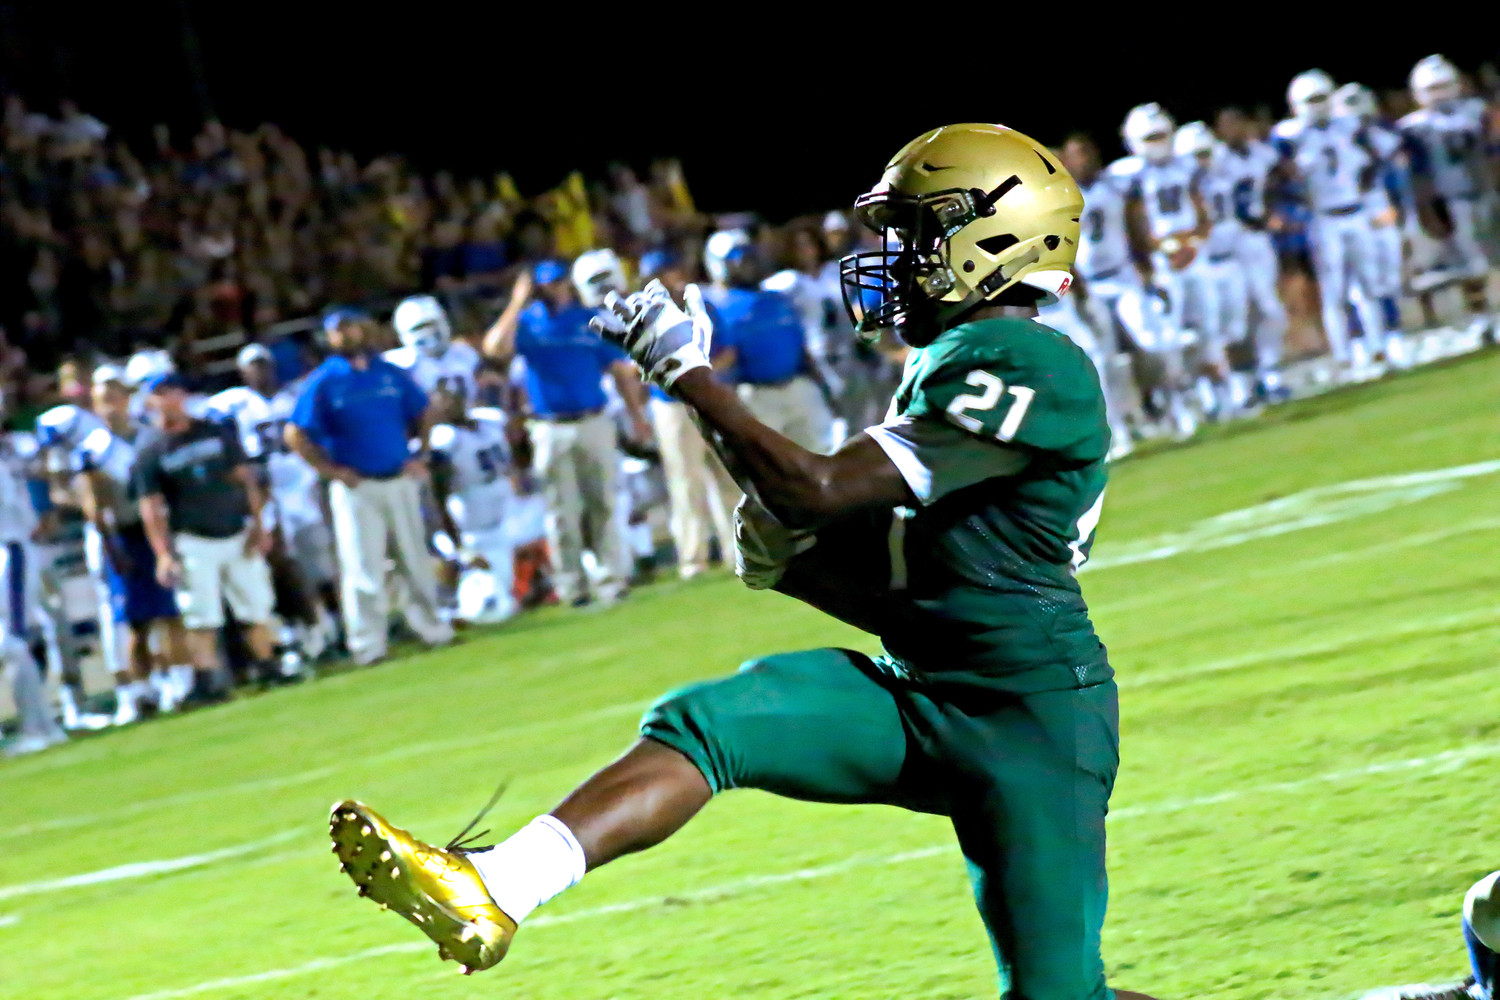 Returning senior tailback Anfernee McCaskill caused fits for Clay defense with his outside sweeps getting yards including this high-stepping touchdown in the first half that put Fleming Island uip 21-7.